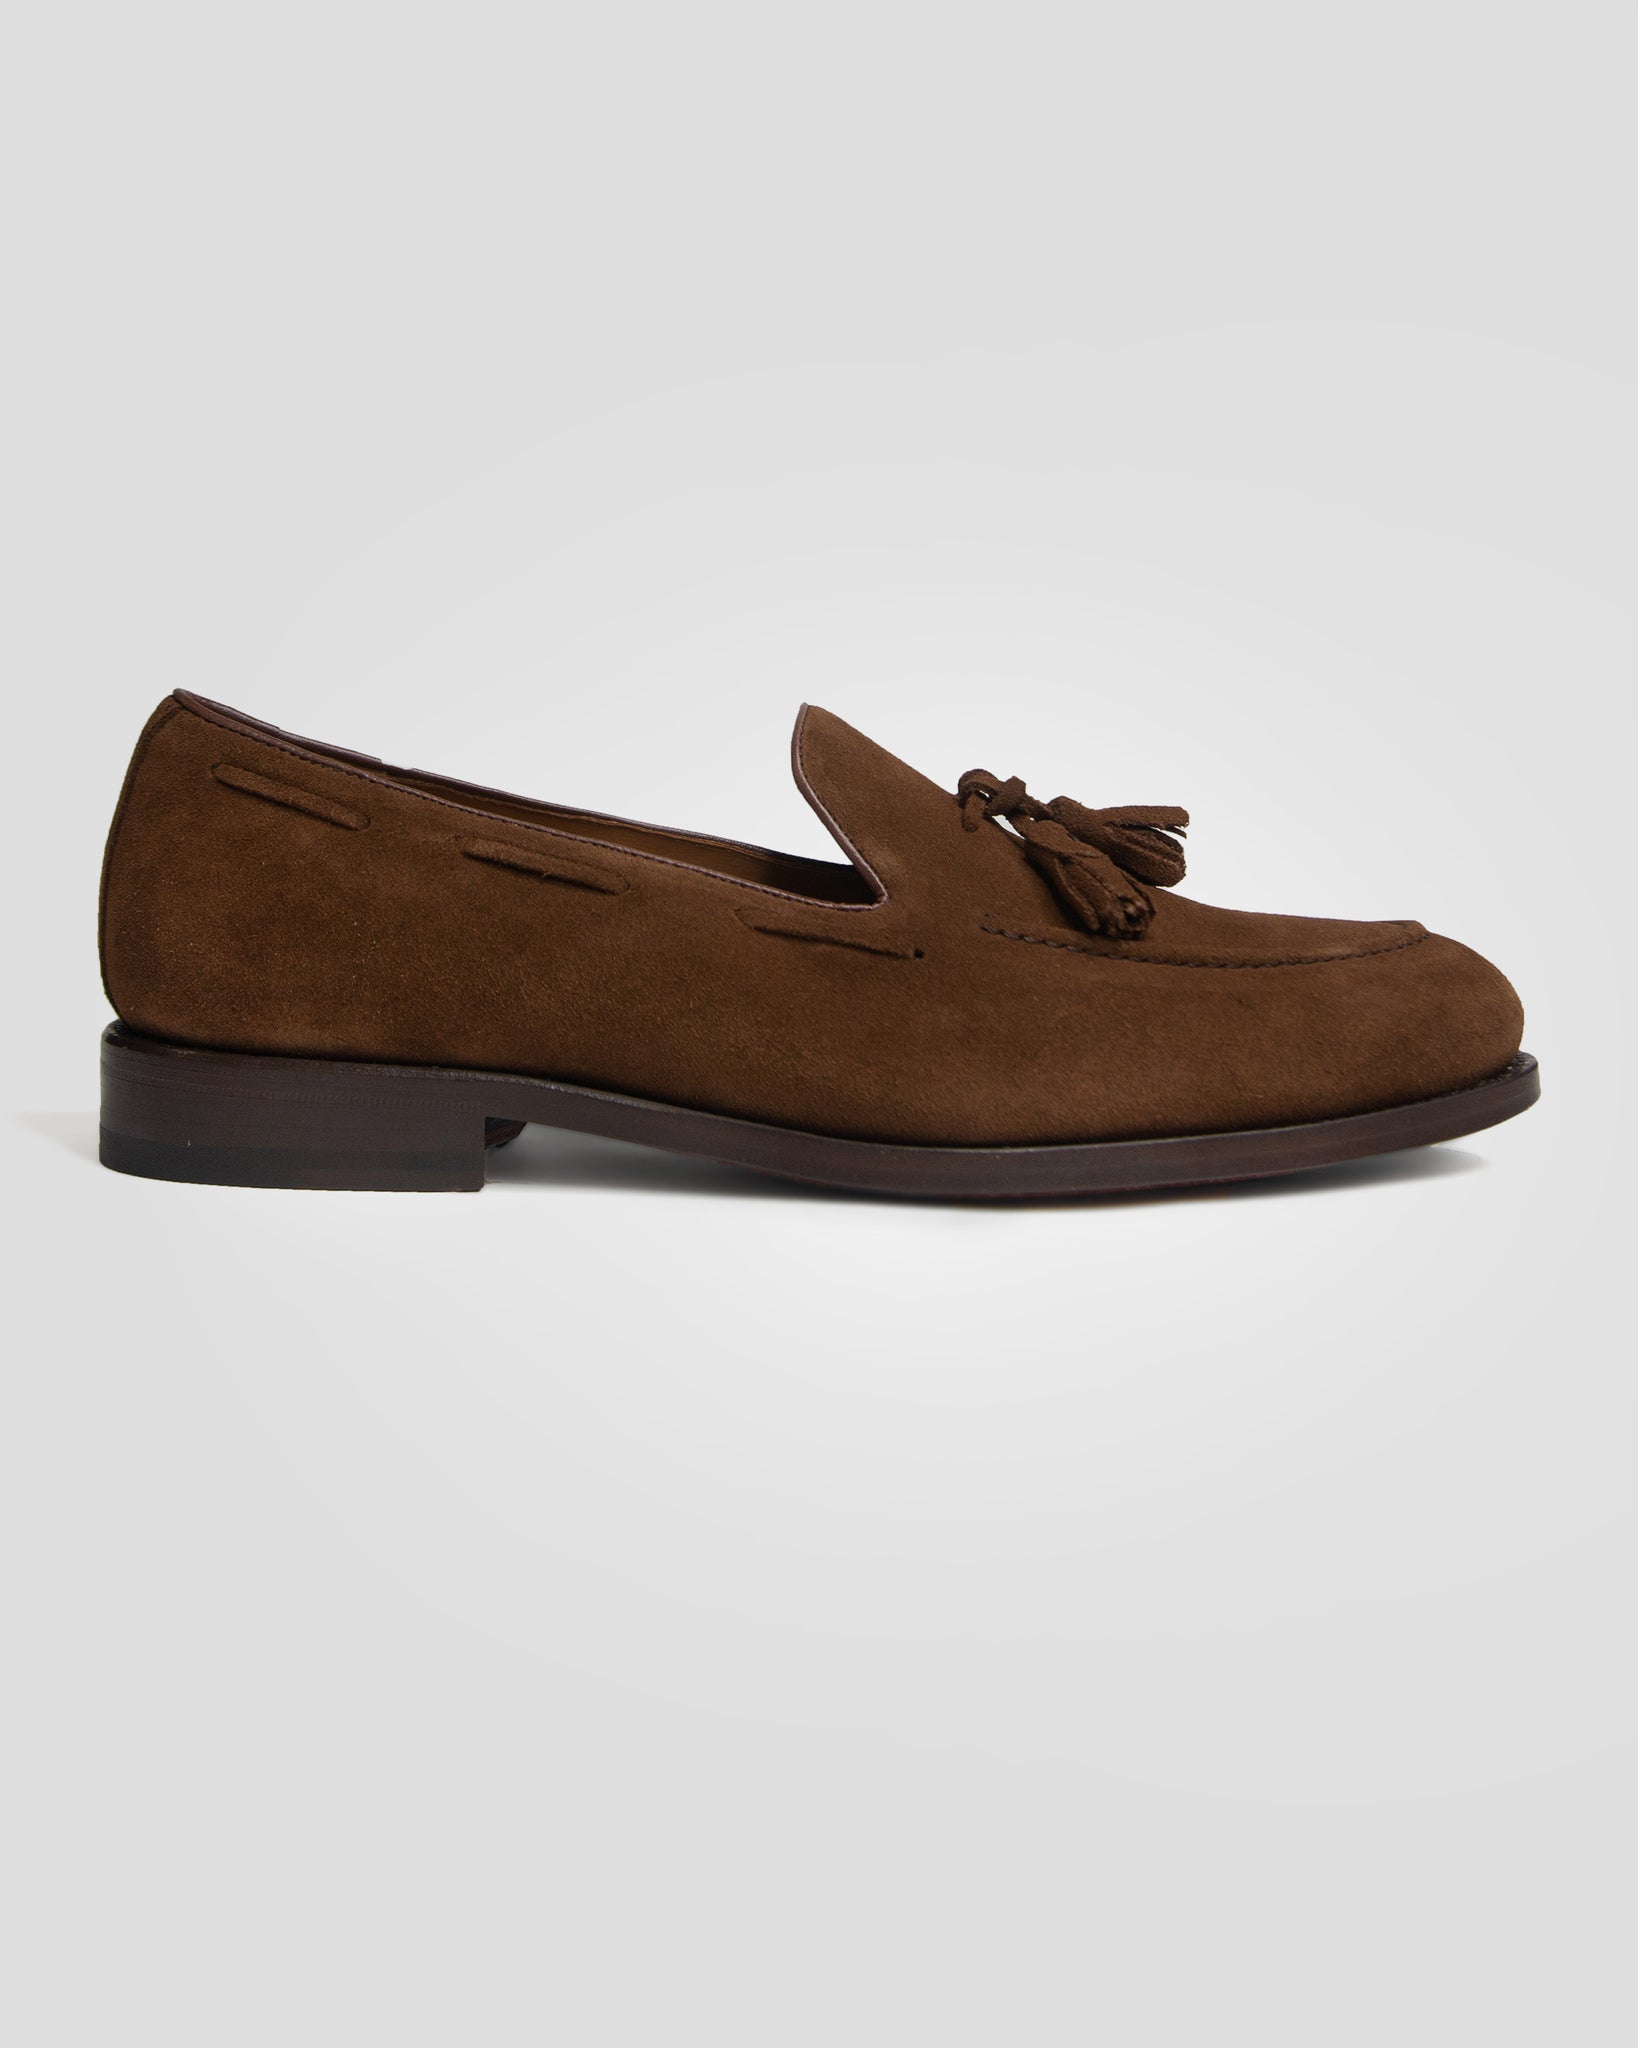 Southern Gents Tassel Loafers - Coffee